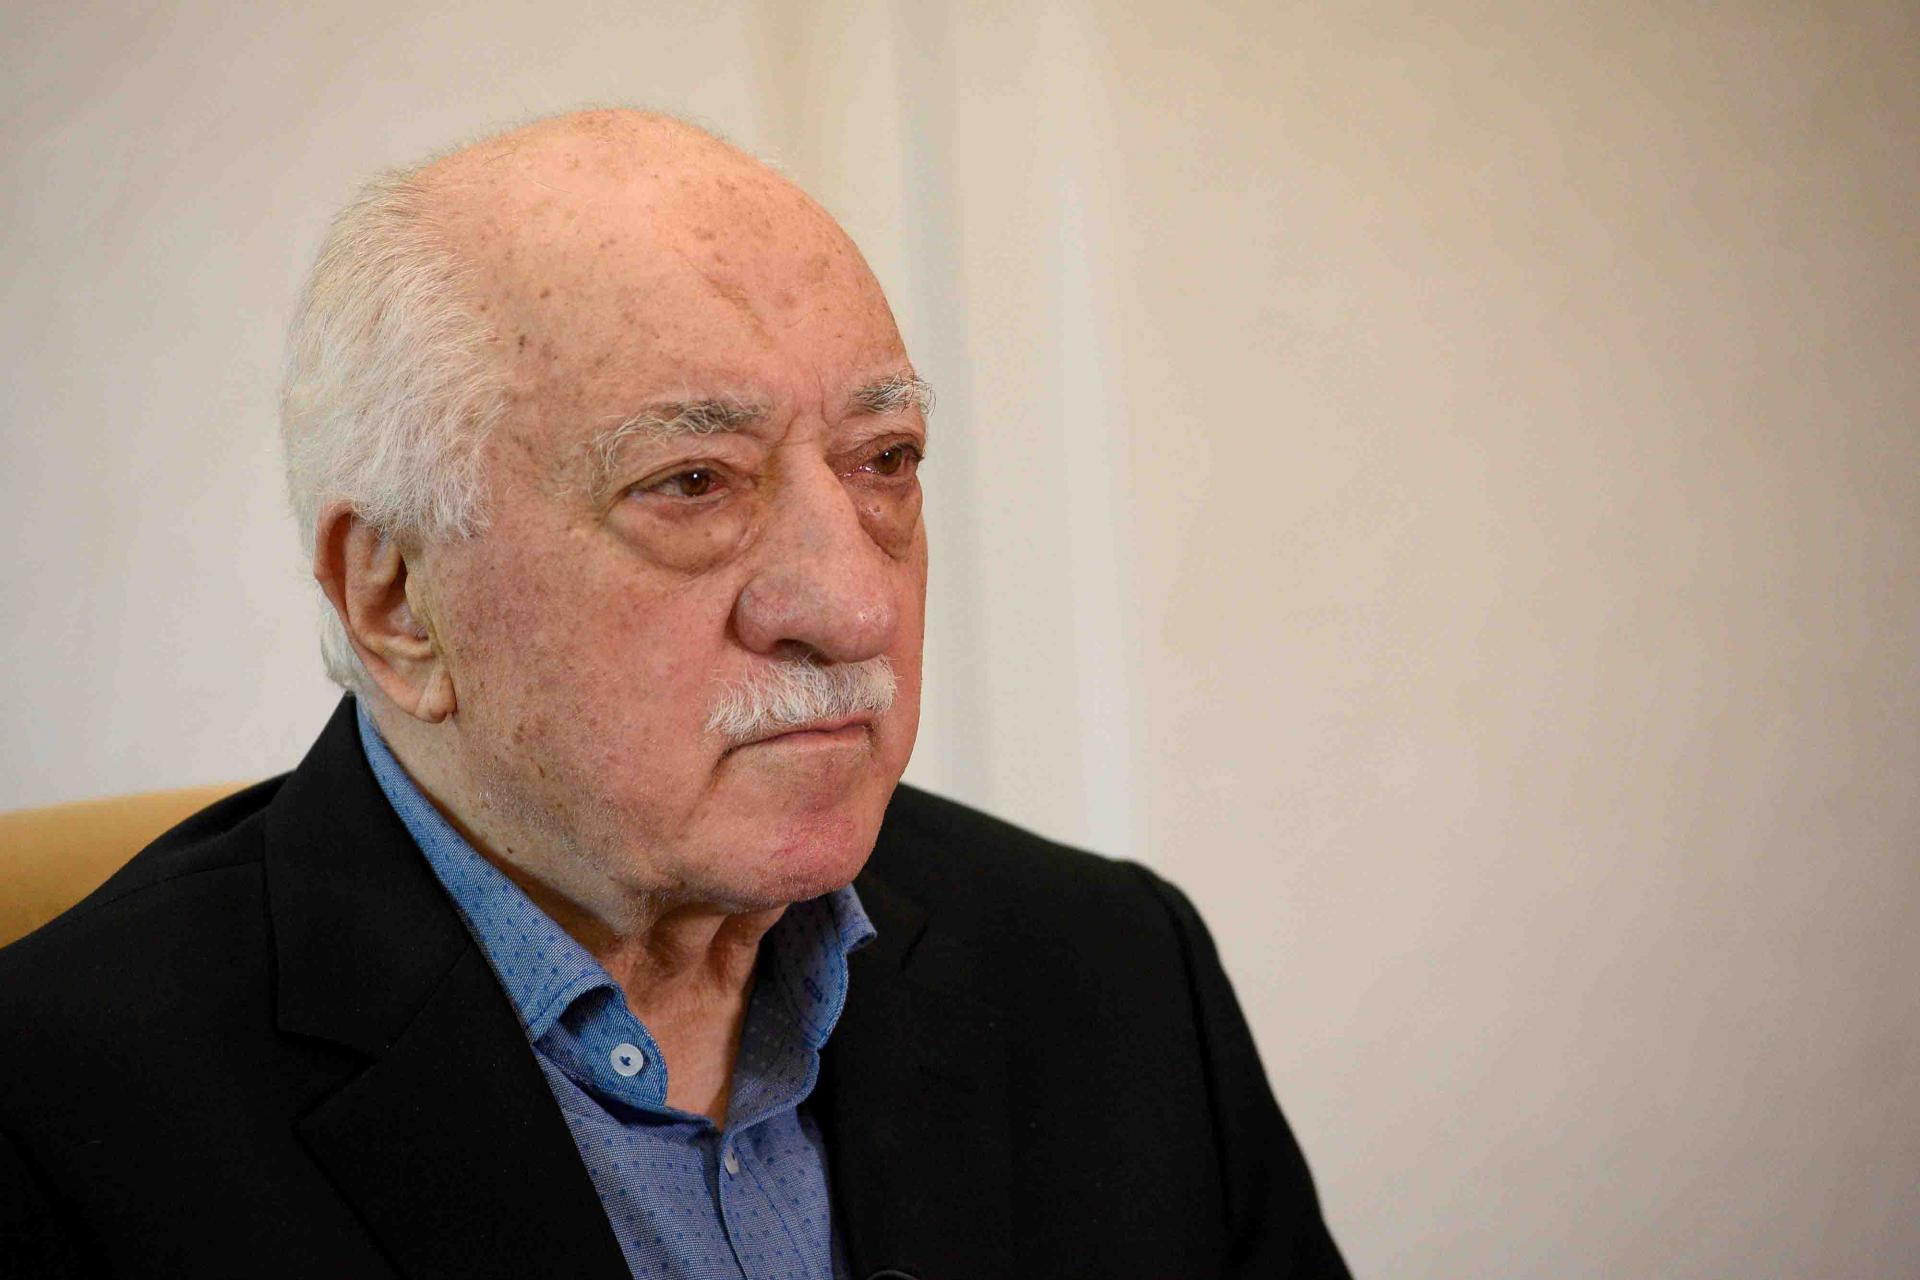 Described by the government as a "terrorist organisation", the slightest whiff of association with Gulen has destroyed lives